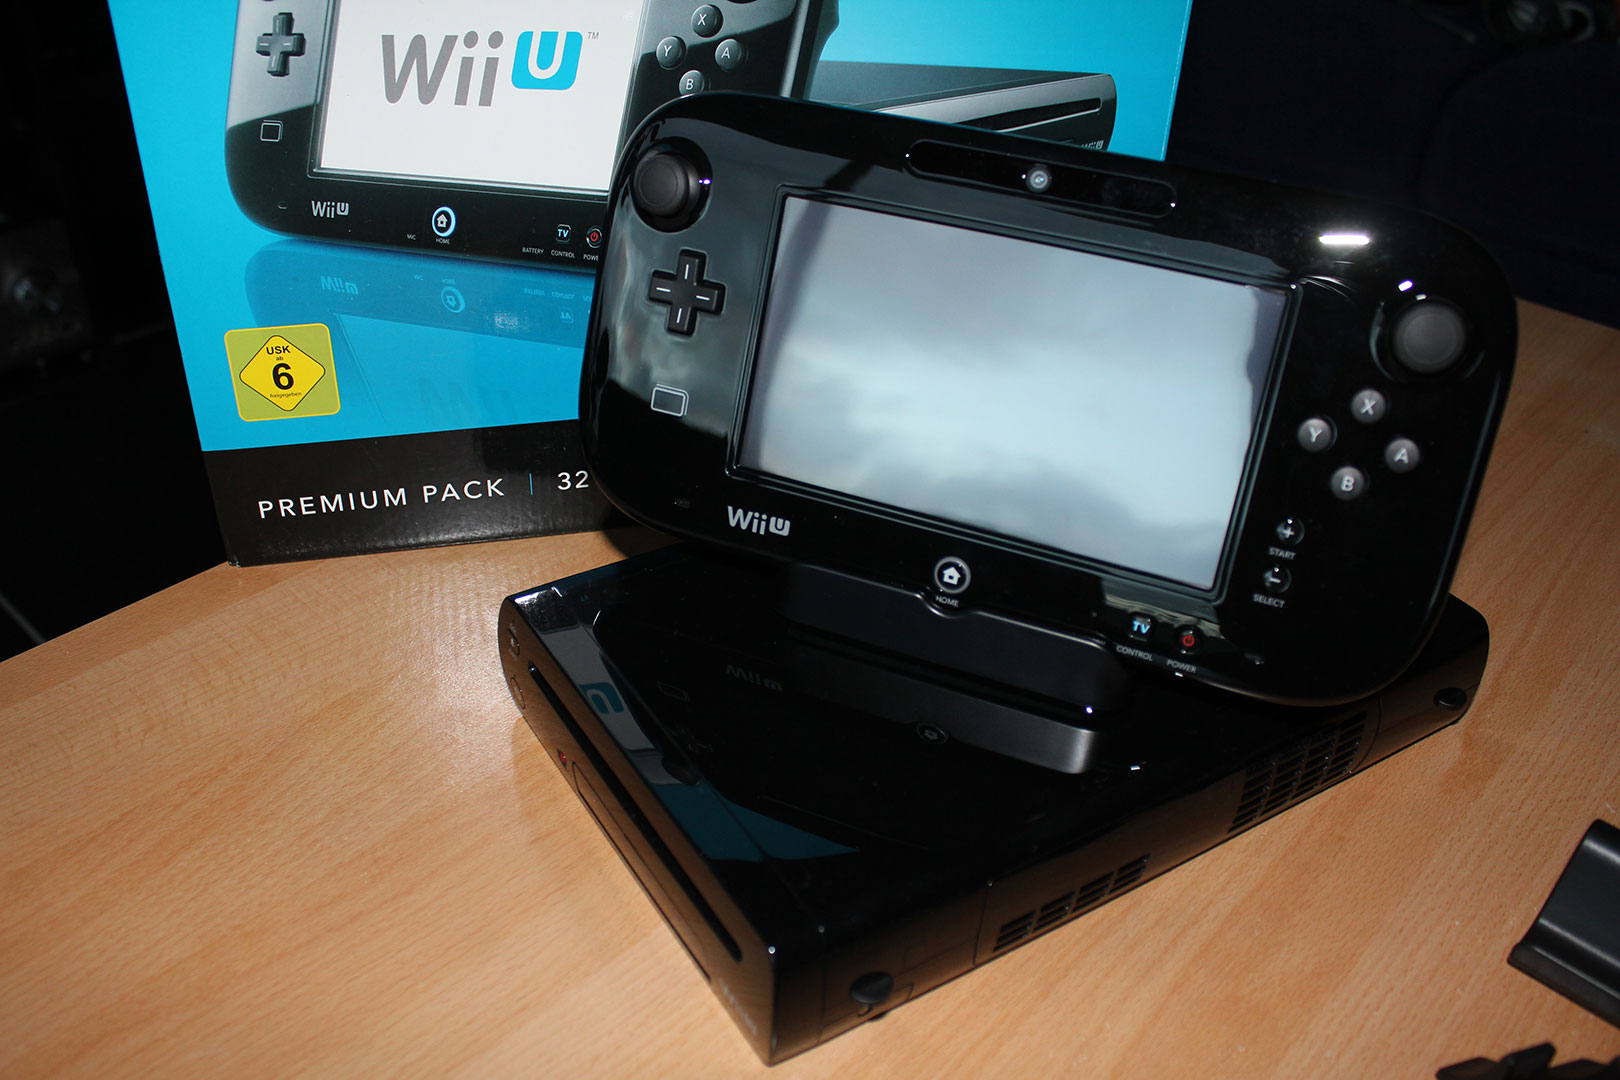 Overall Glossary Teenage years CEMU 1.9.1 adds separate window to display the GamePad screen, improves  games compatibility